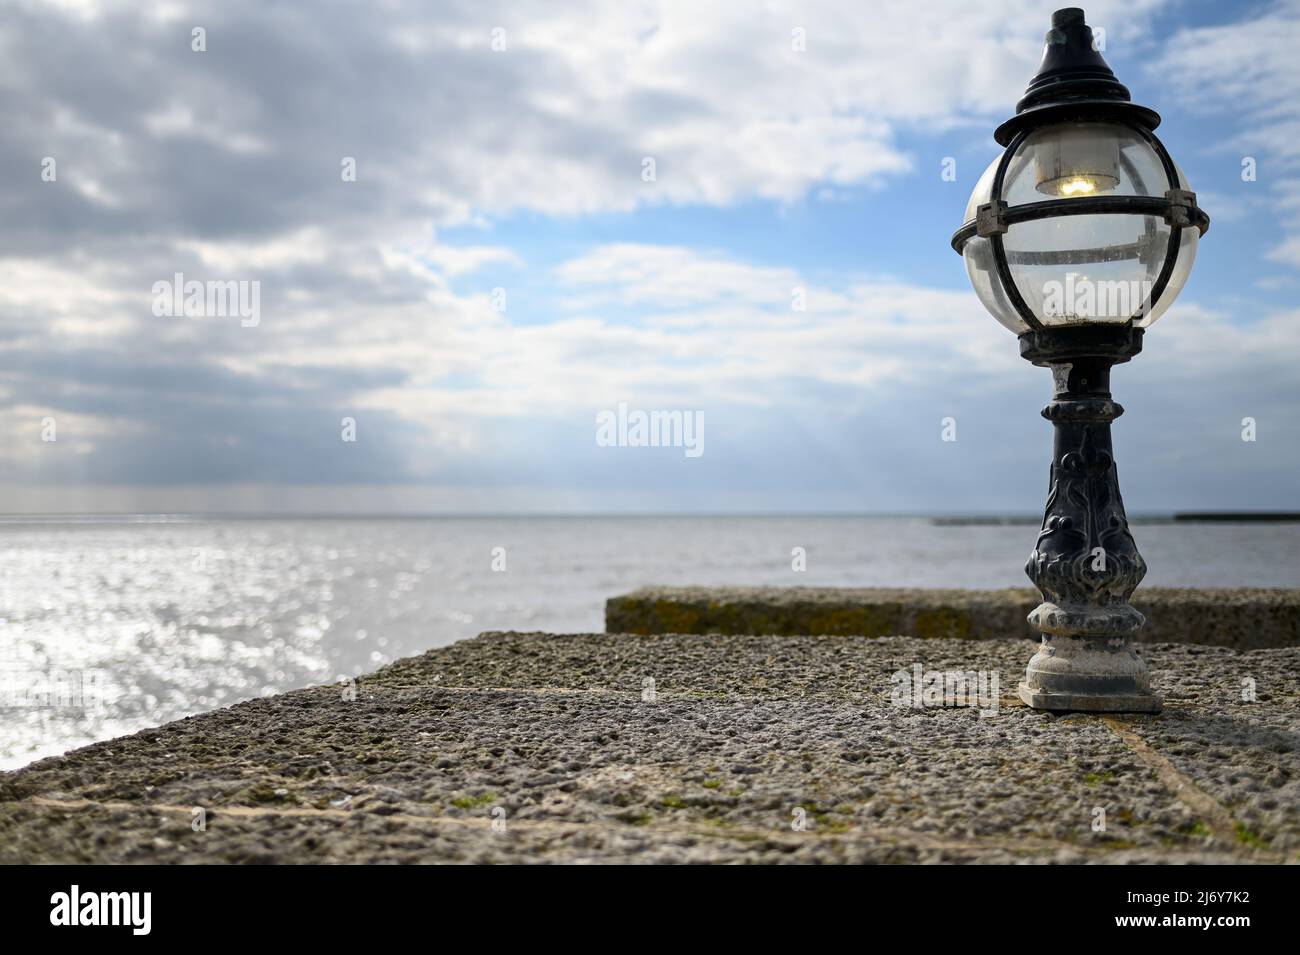 Ocean view at Lyme Regis from stone wall with Lamp in foreground Stock Photo